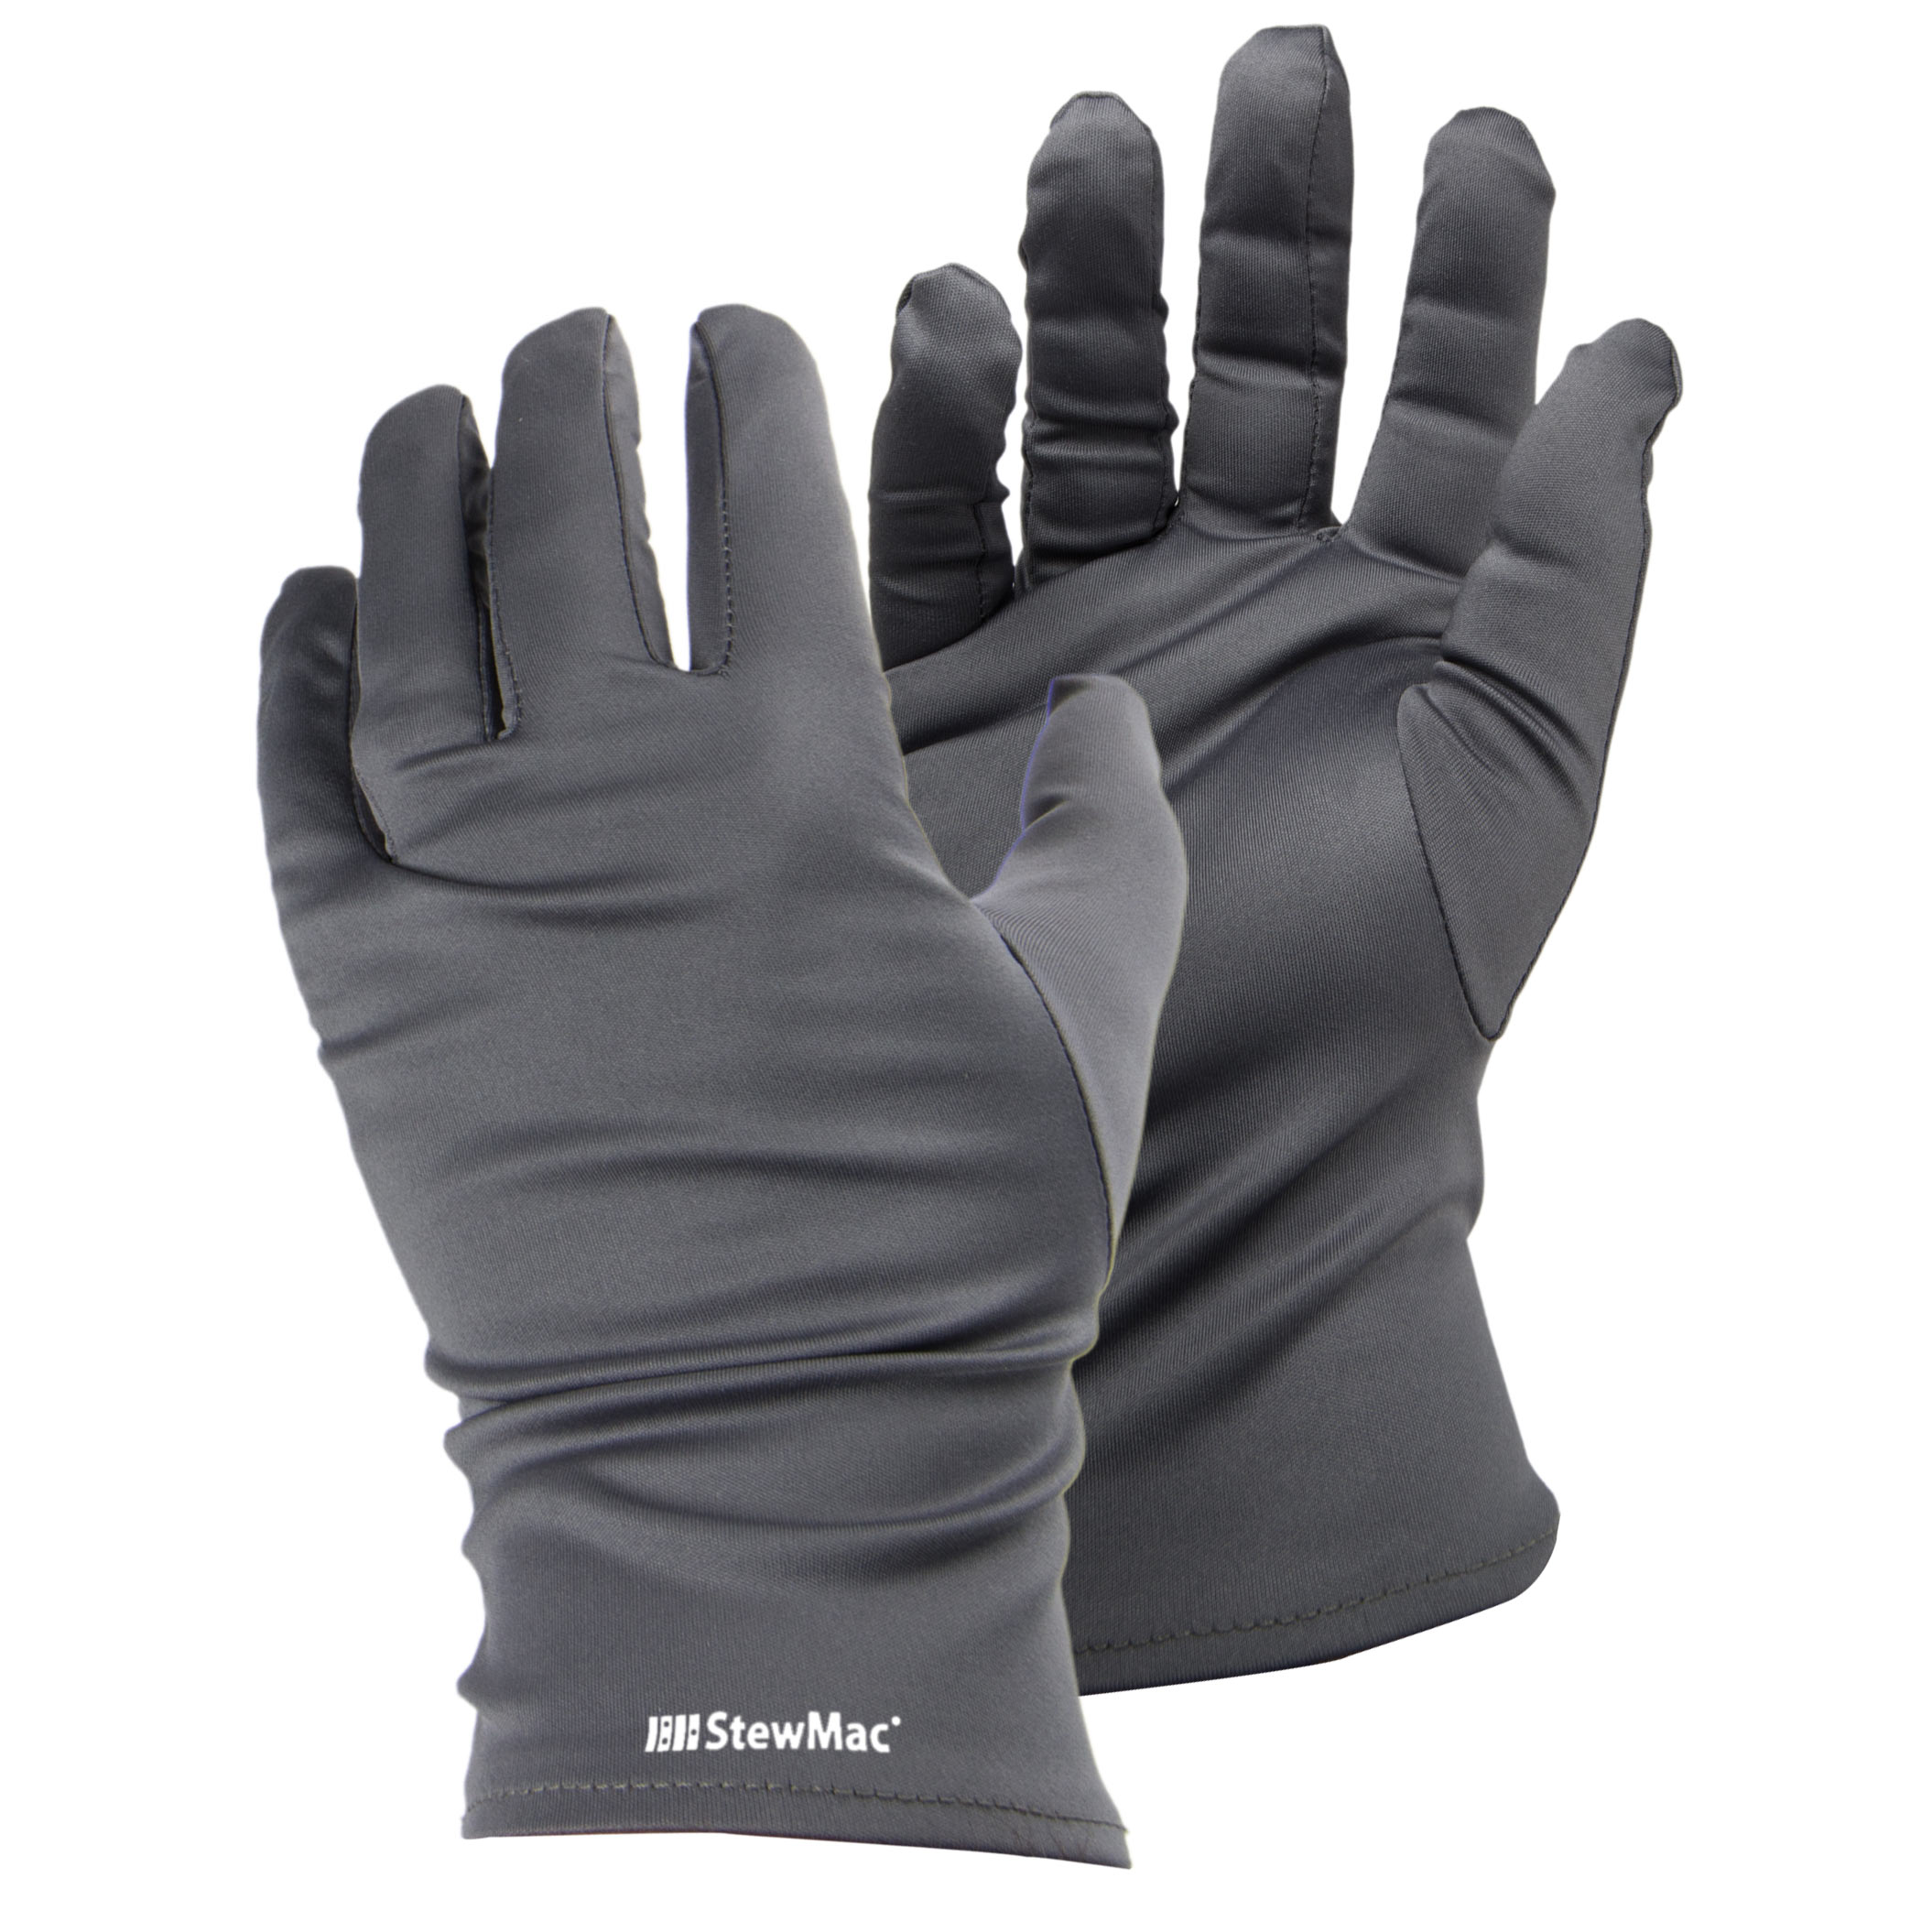 StewMac Inspection Gloves